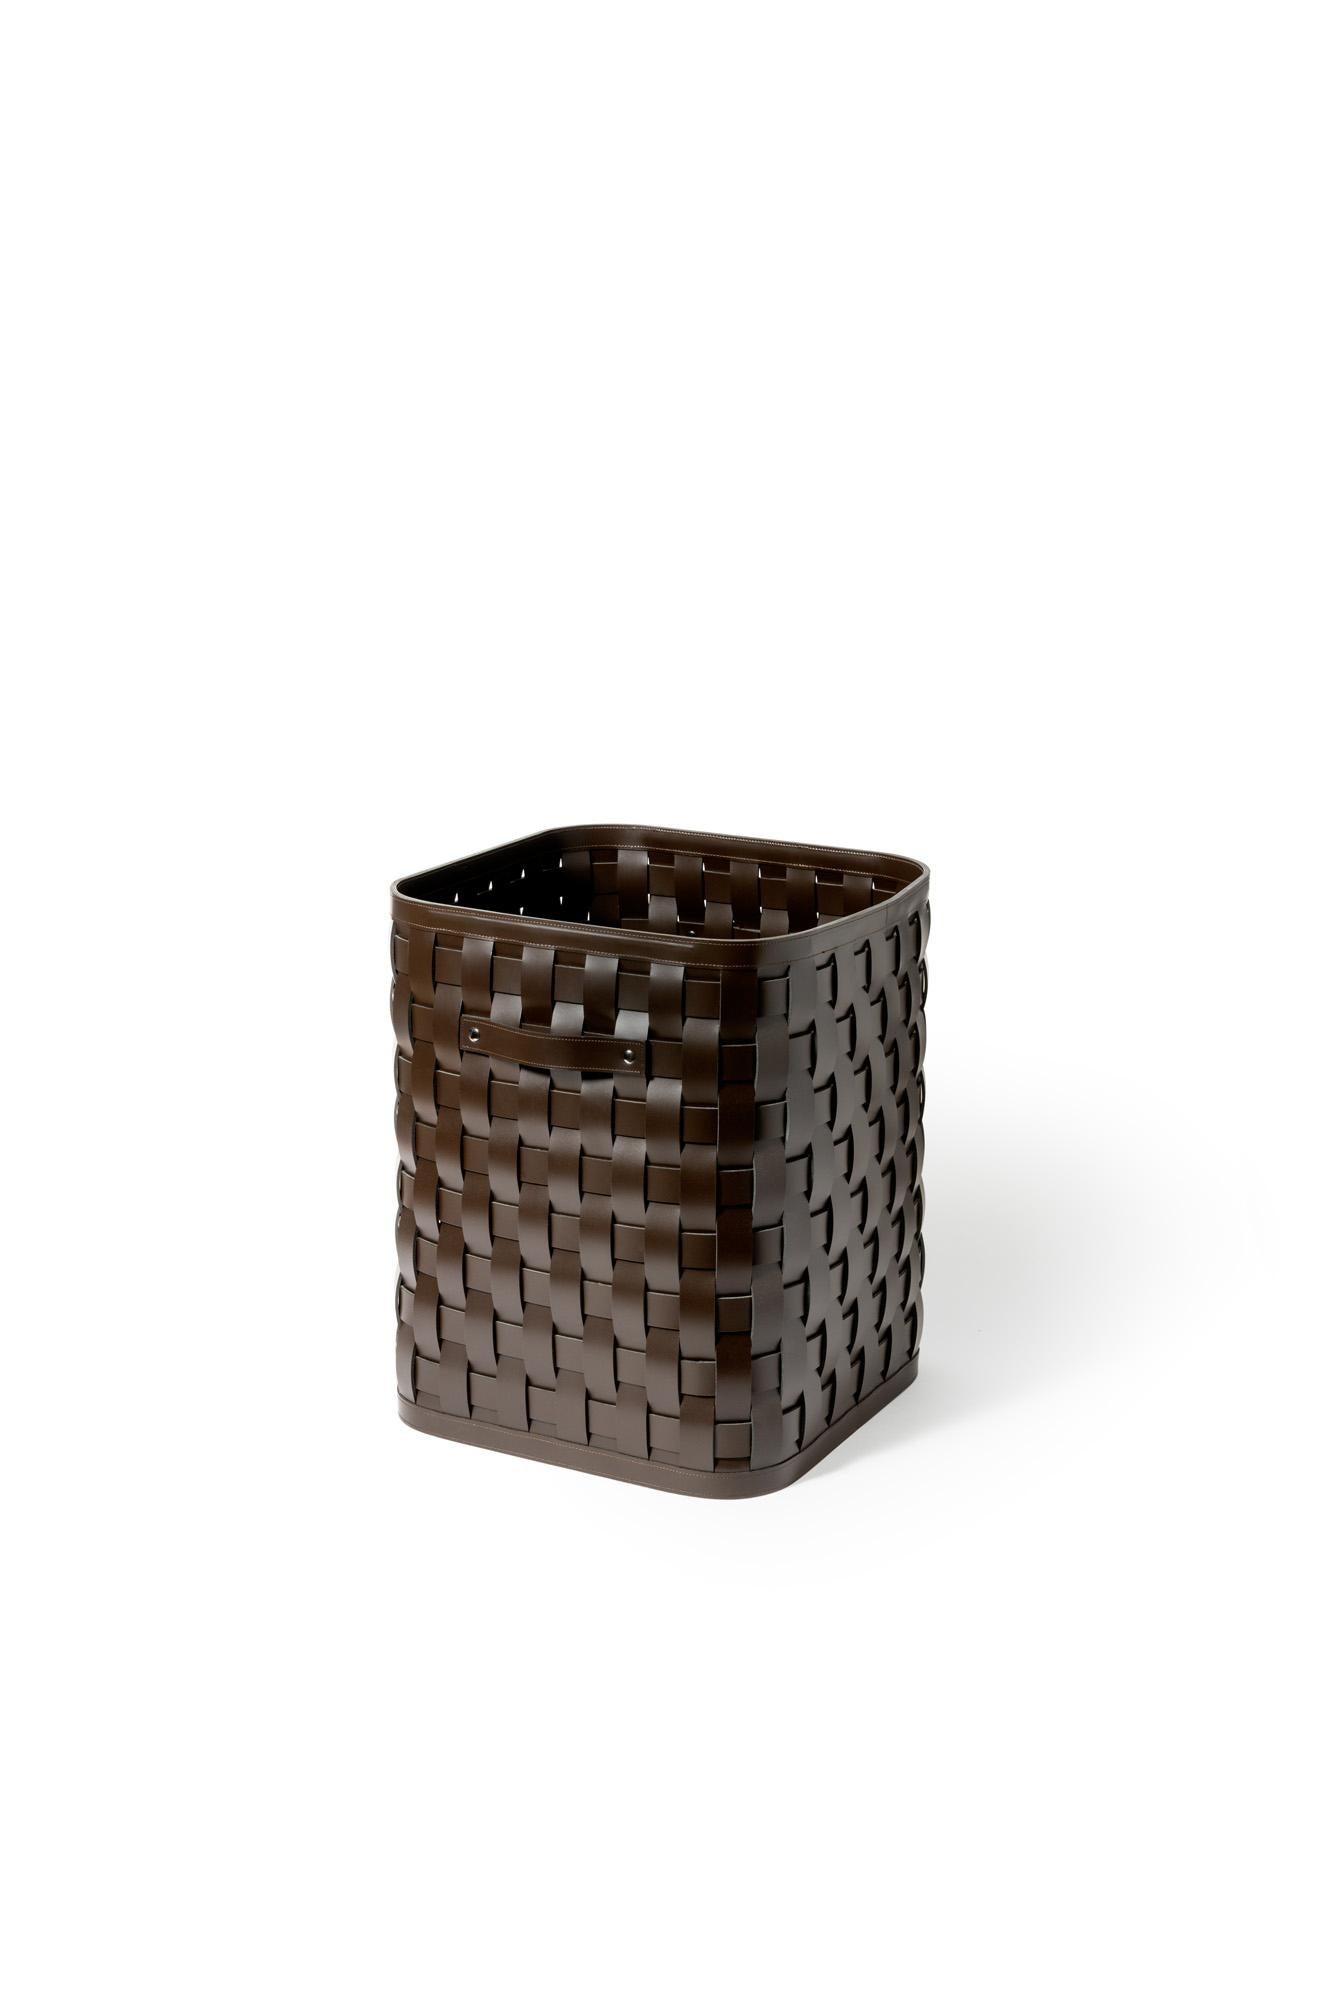 Sleek and functional, this basket is handcrafted with meticulous care and made of handwoven leather that is 100% eco-friendly, durable, and easy to clean, suitable for both indoors and outdoors.

The functional lid makes this basket particularly